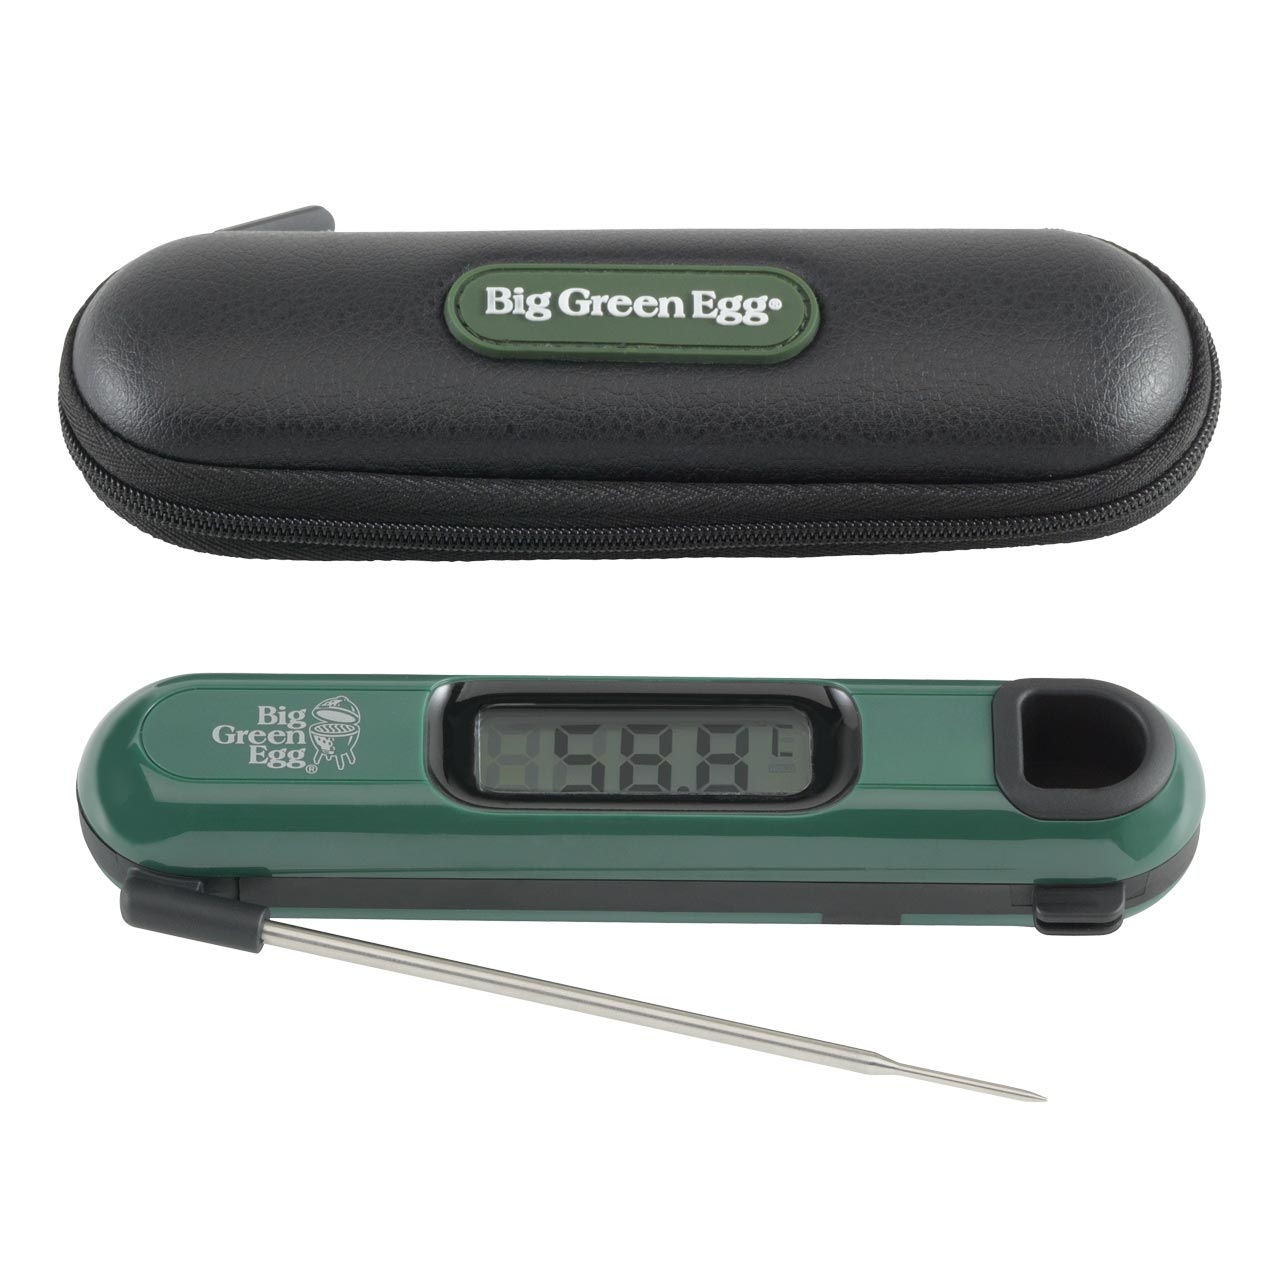 Big Green Egg Digitales Thermometer inkl. Hülle